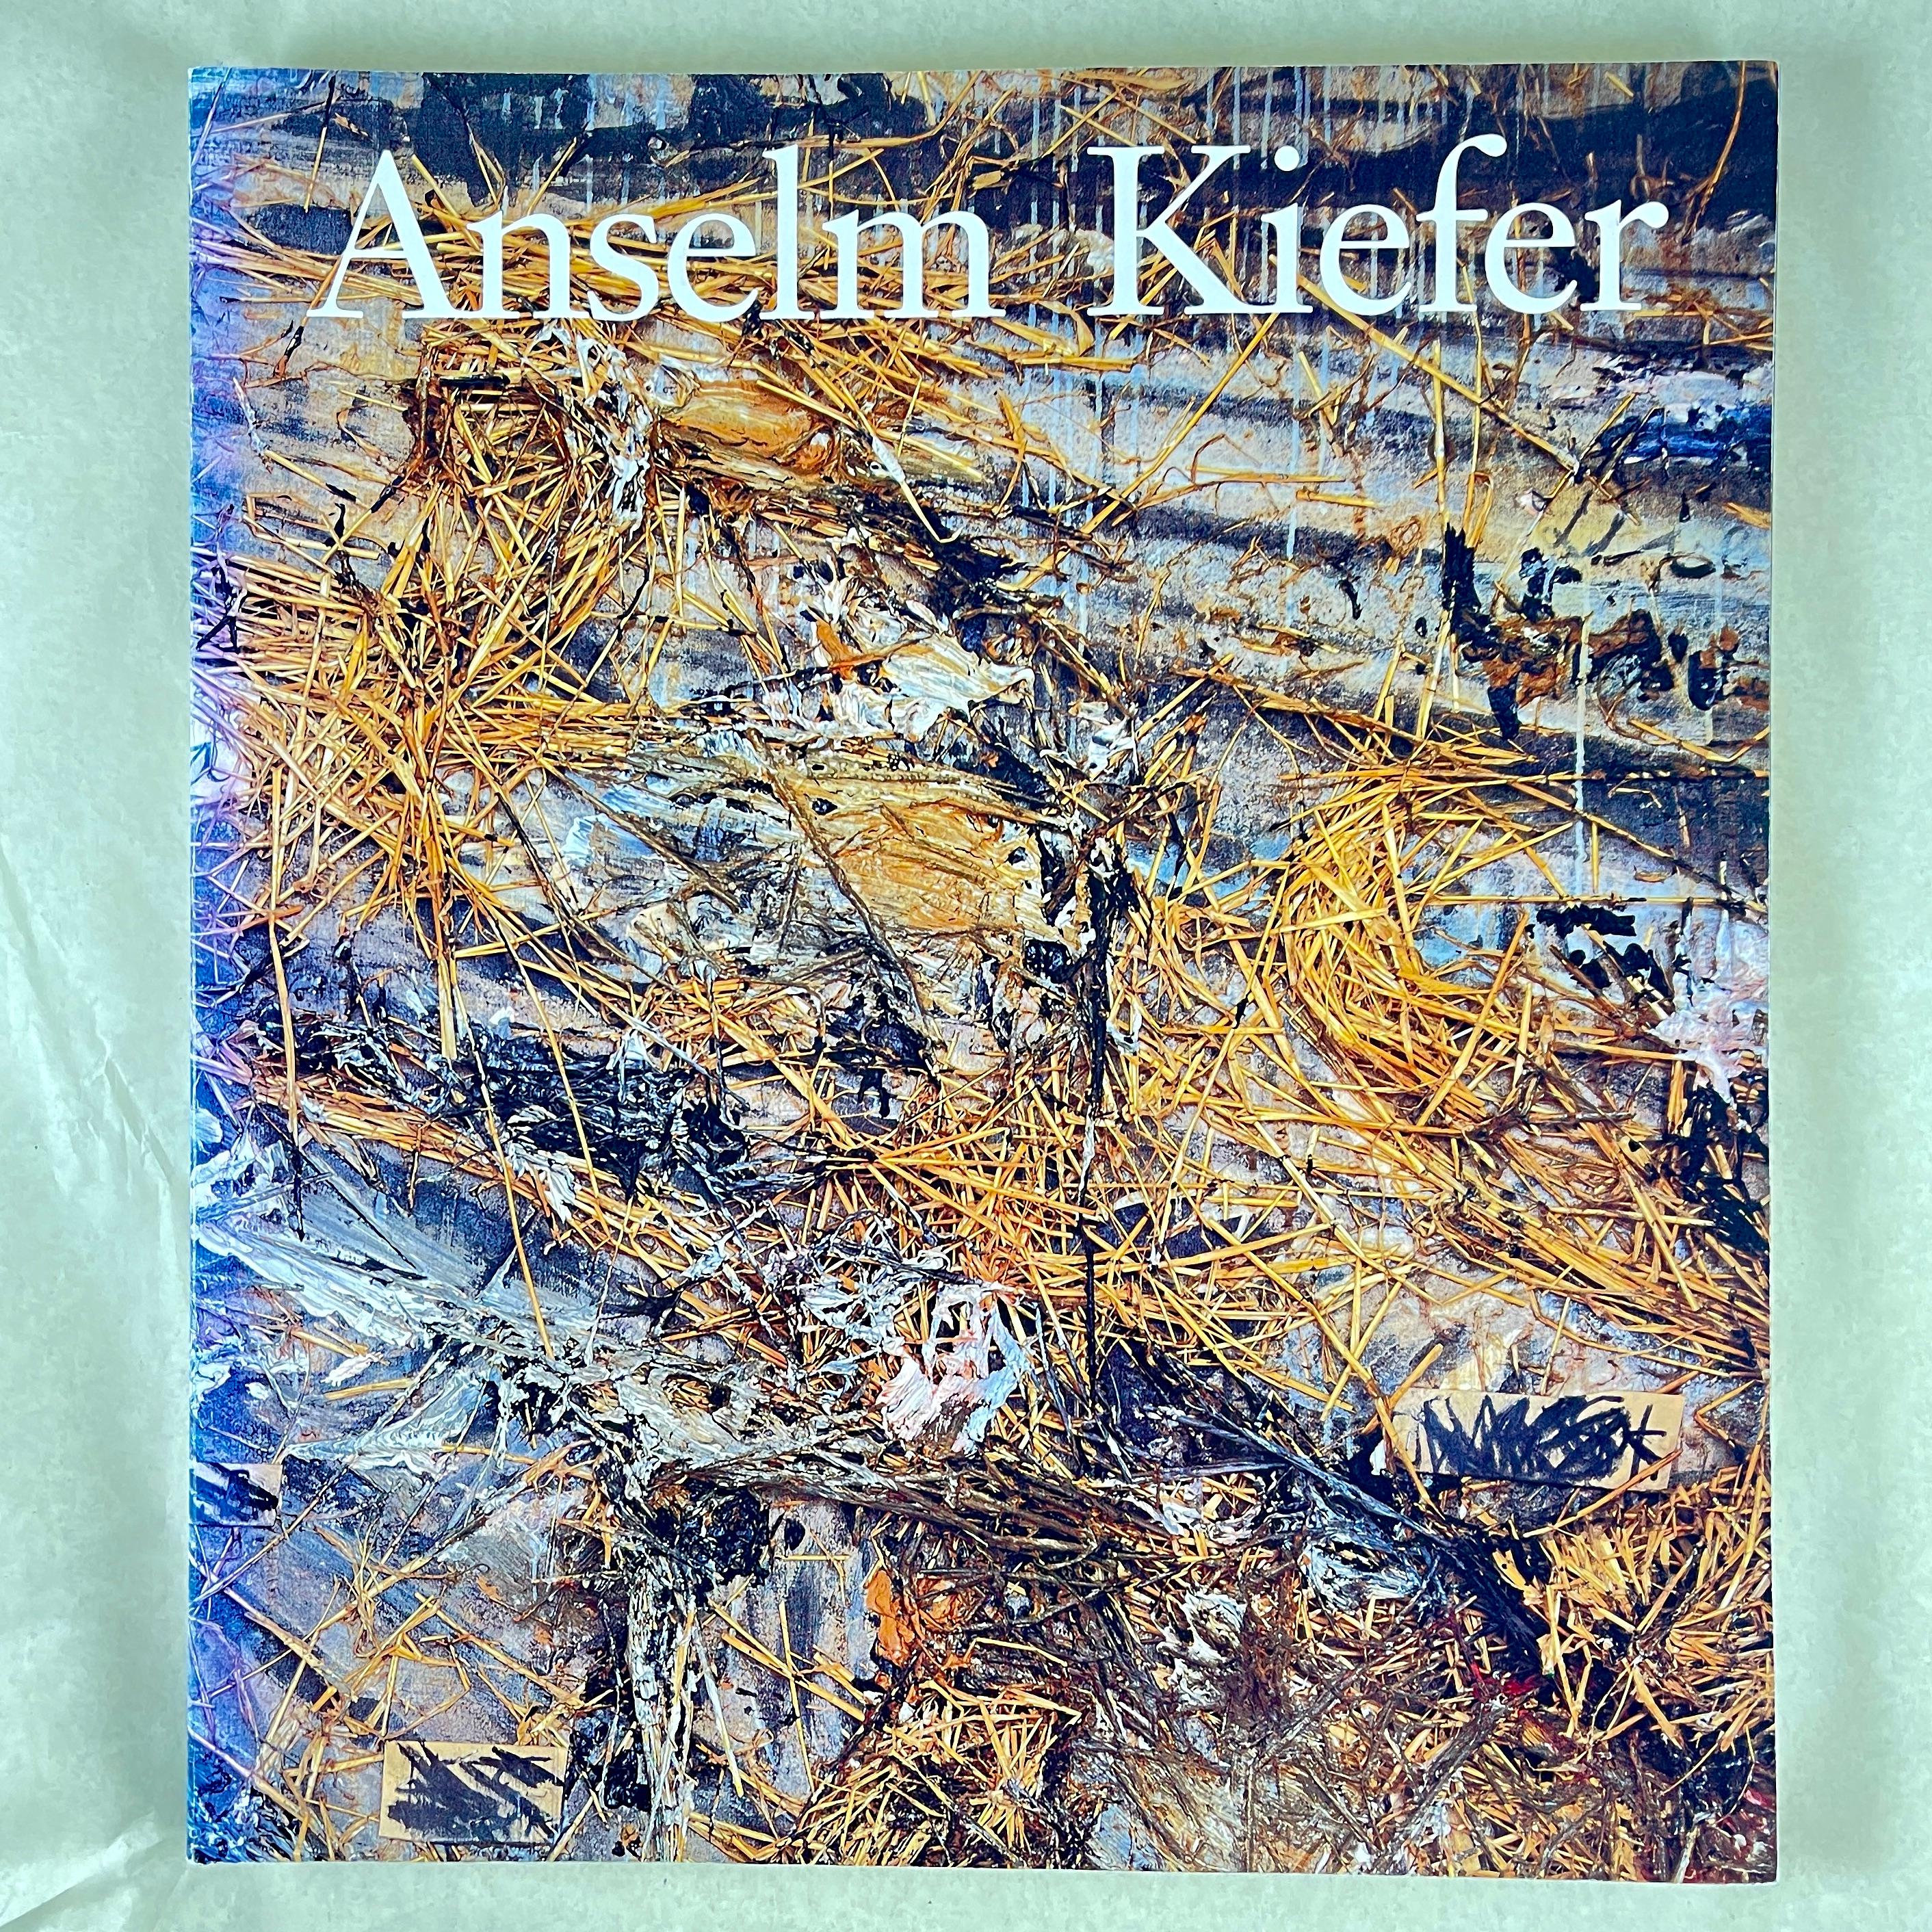 “Anselm Kiefer”  by Mark Rosenthal– a Museum Edition Trade paperback from the 1987 exhibition mounted in Philadelphia, Chicago, Los Angeles, and the MOMA in New York.

Anselm Kiefer is a German painter and sculptor. His works incorporate materials